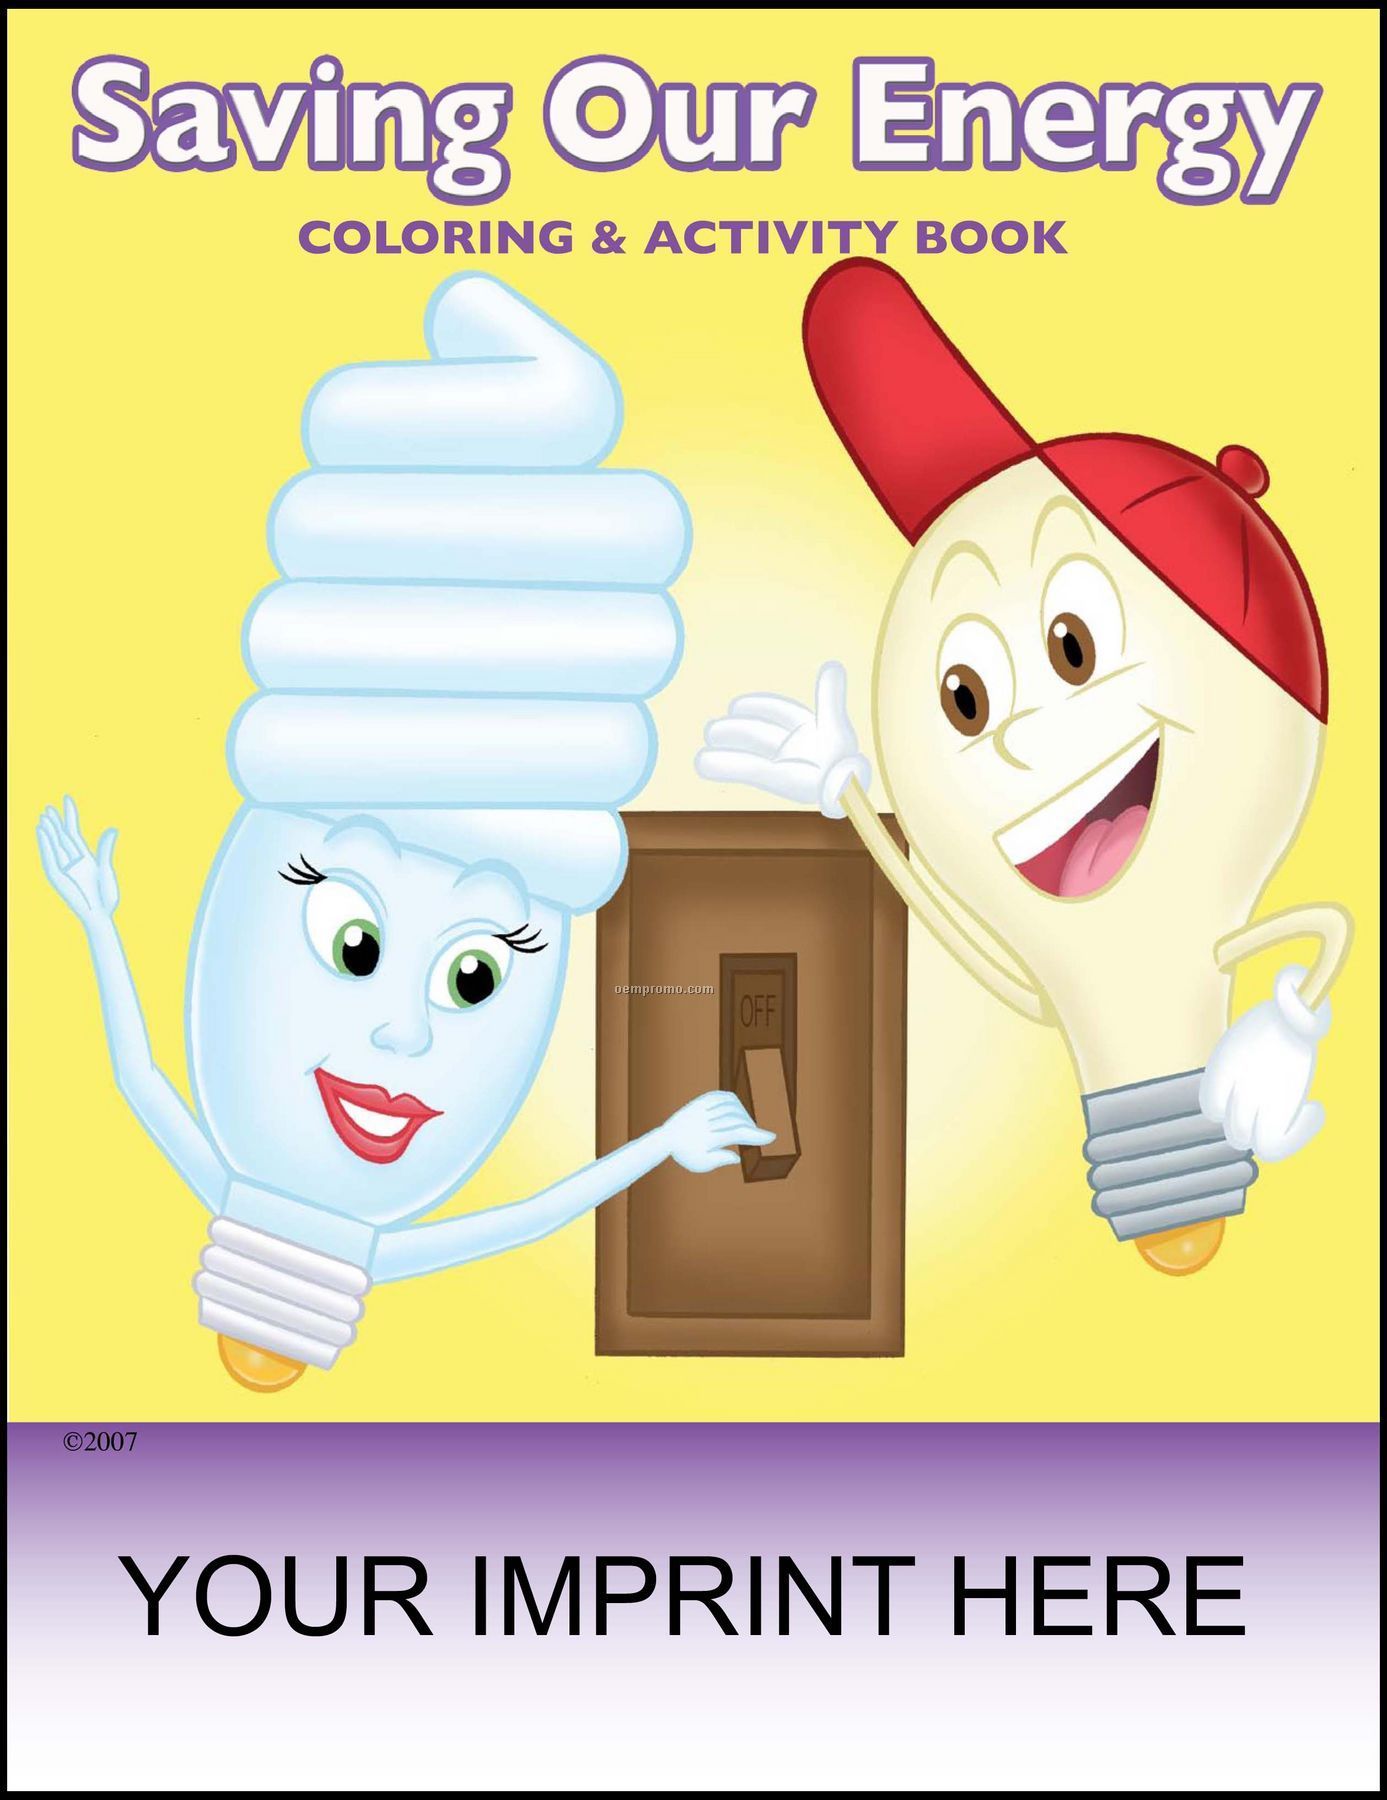 Saving Our Energy Coloring & Activity Book